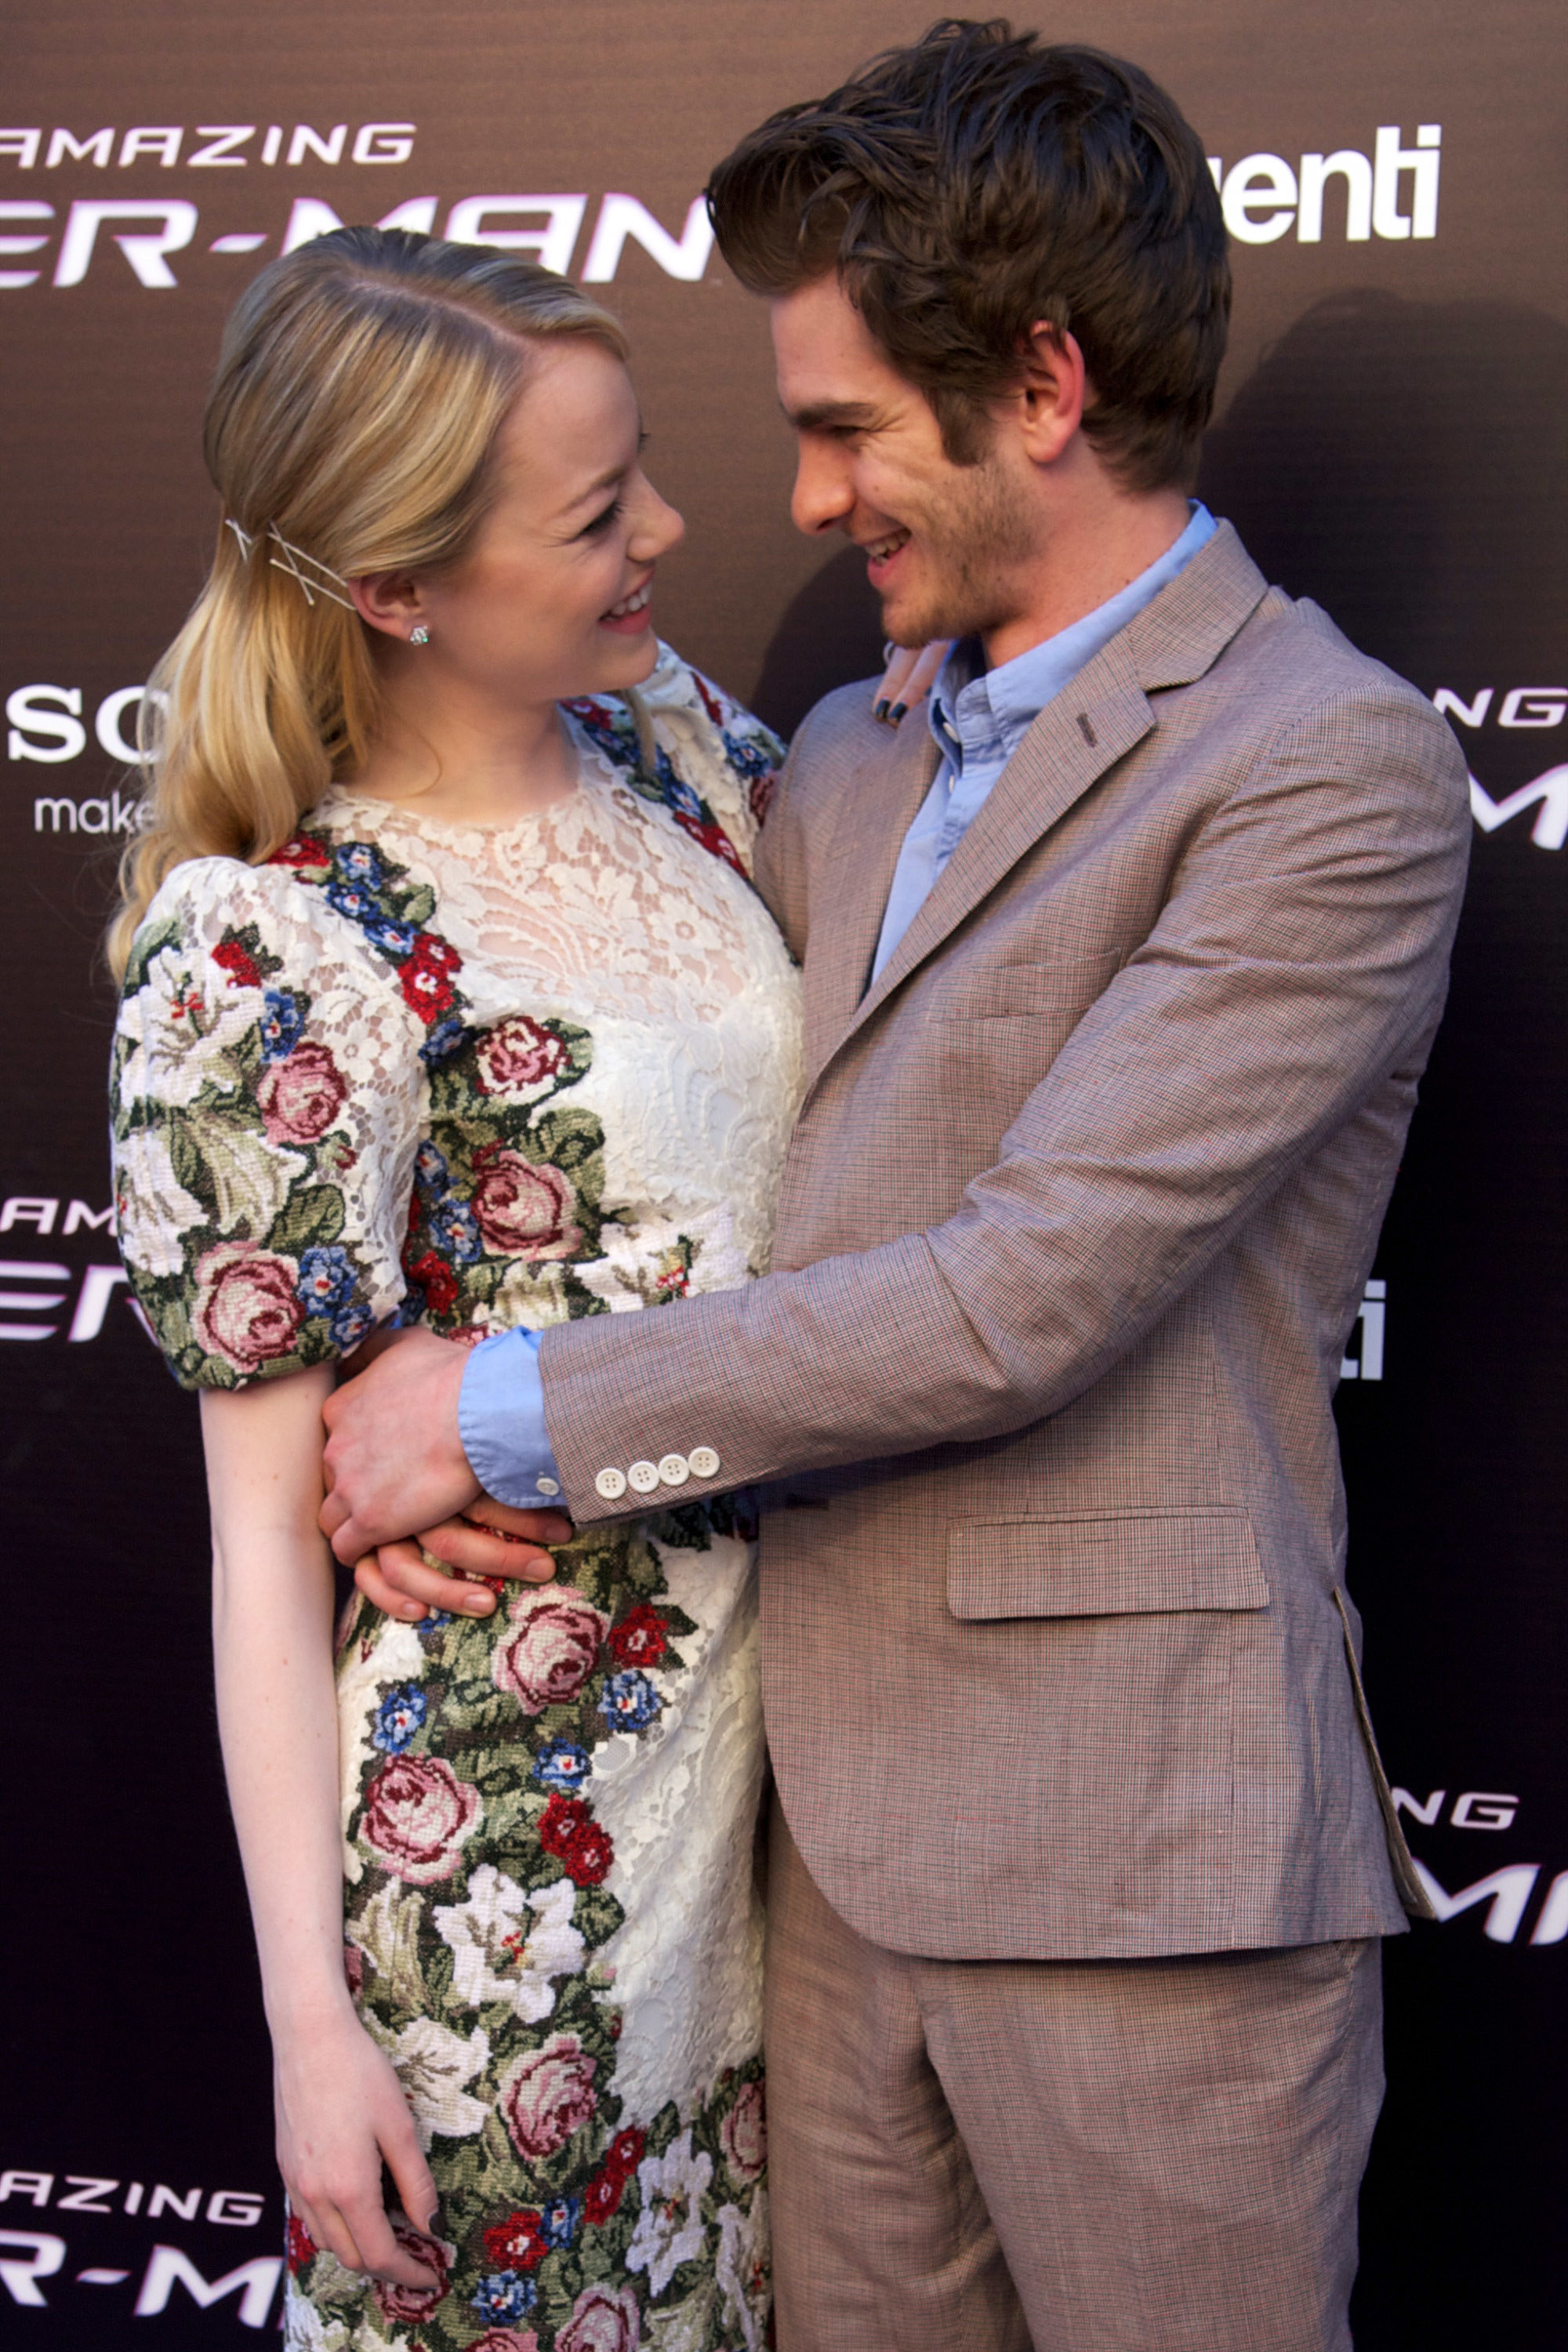 Andrew with his arms around Emma on the red carpet